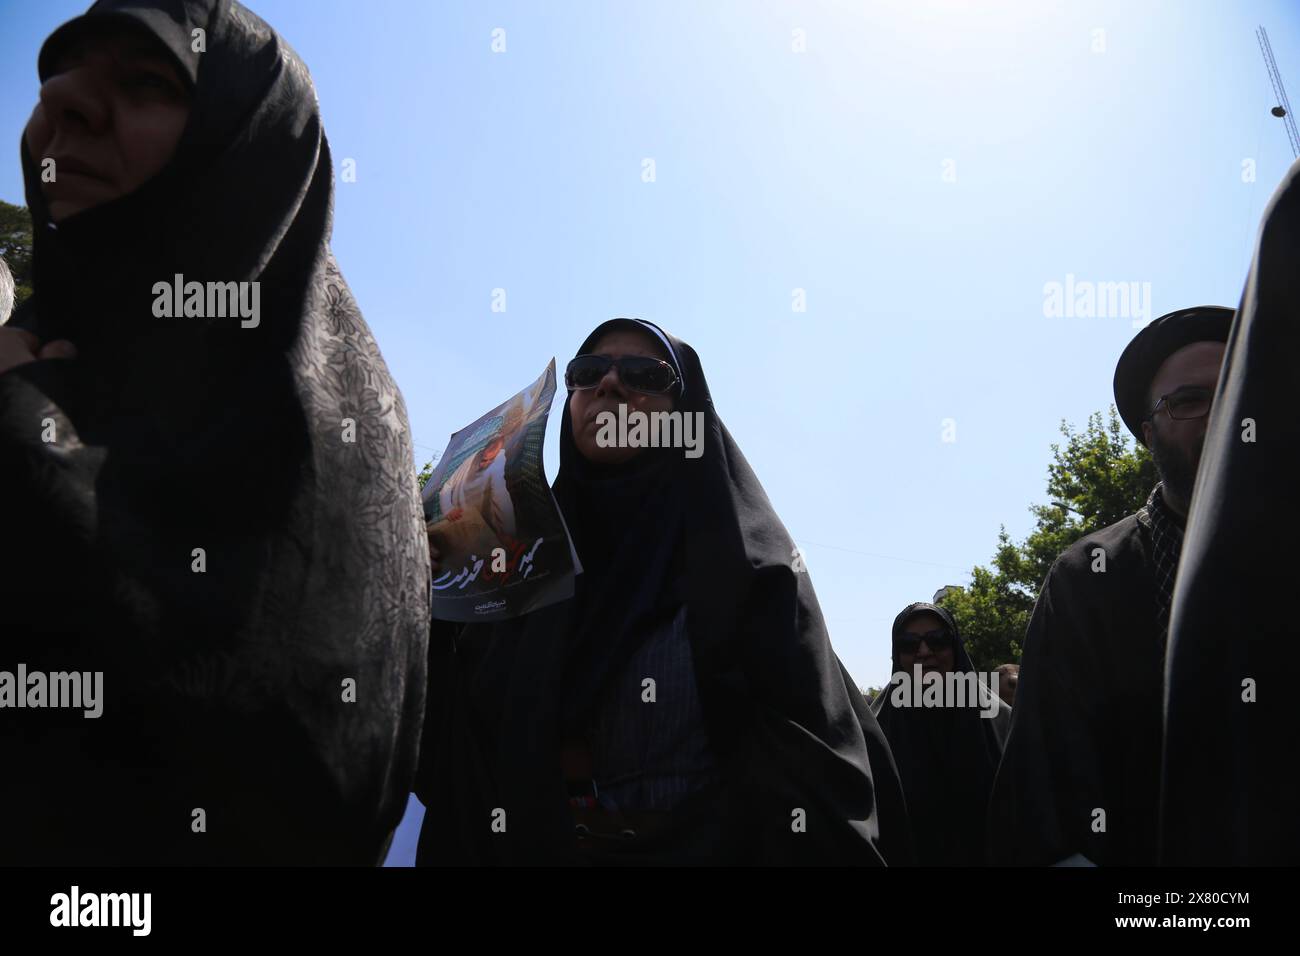 Tehran, Iran. May 22, 2024, Tehran, Iran: Iranian veiled women in black Chadors walk during a funeral ceremony for the late President Ebrahim Raisi and his companions who were killed during a helicopter crash in a mountainous region of the country's northwest, in Tehran. Credit: ZUMA Press, Inc./Alamy Live News Stock Photo